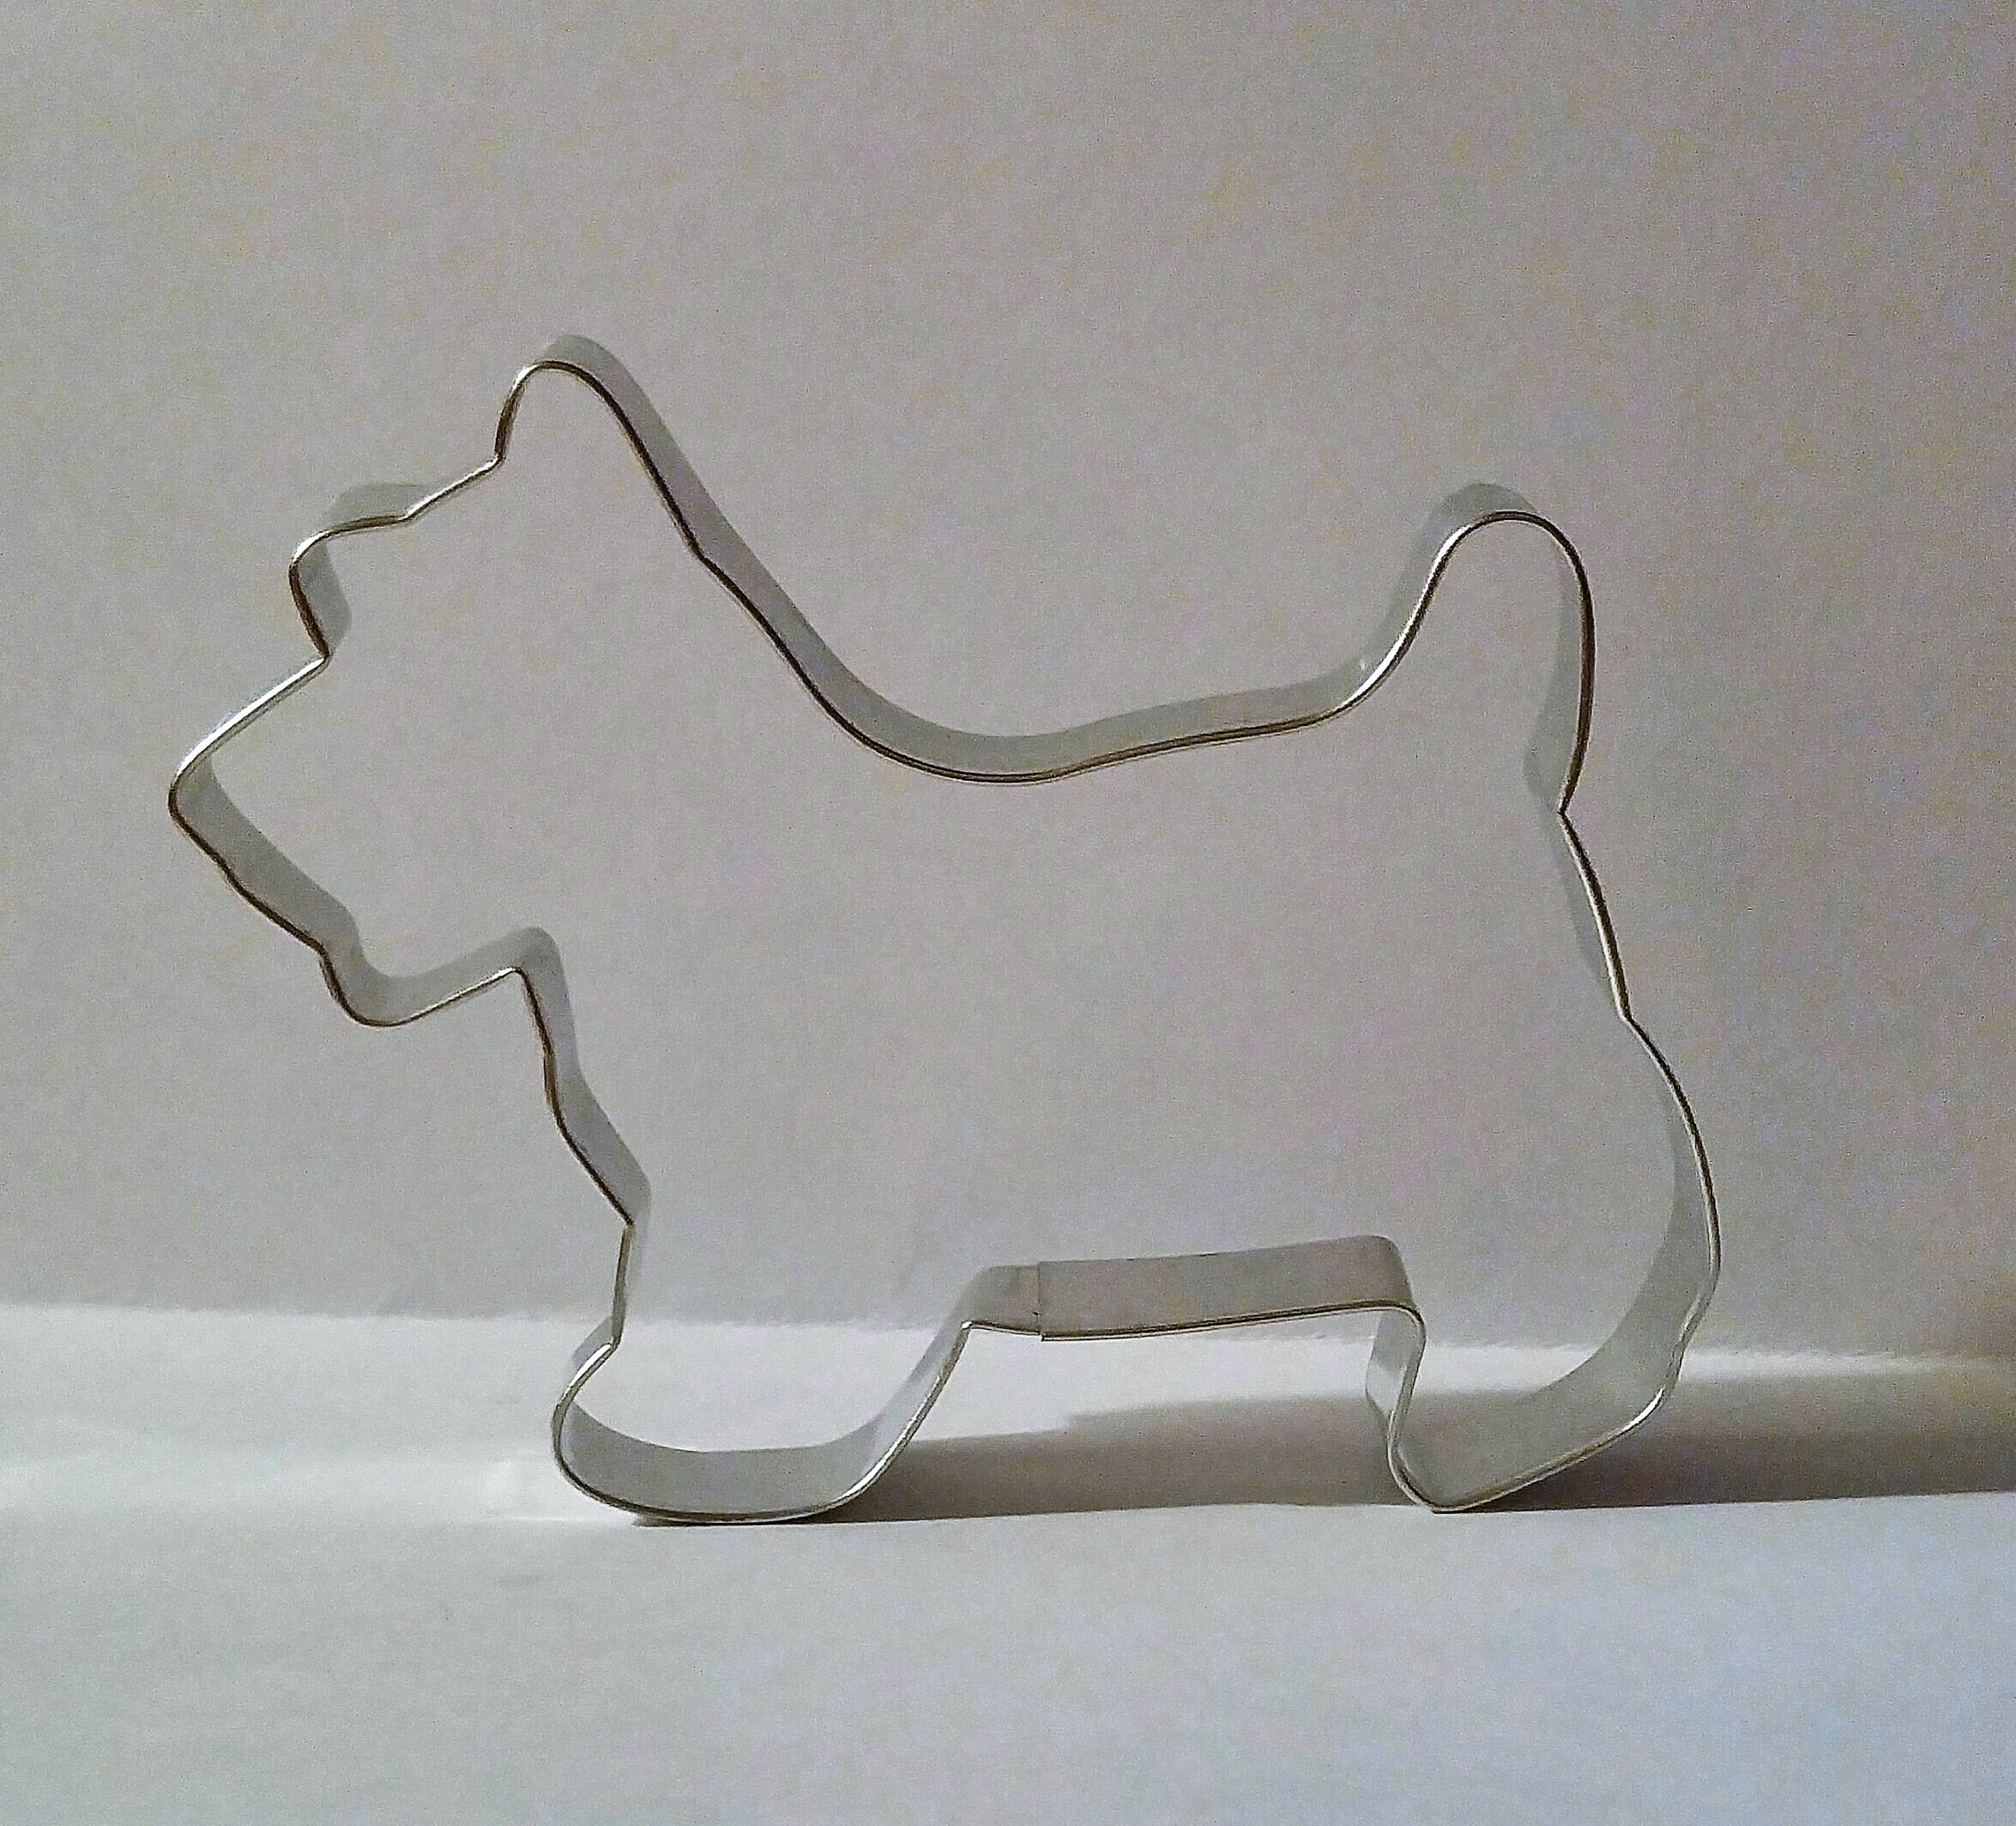 Dog Schnauzer Cookie Cutter Outline #1 CHOOSE YOUR OWN SIZE 